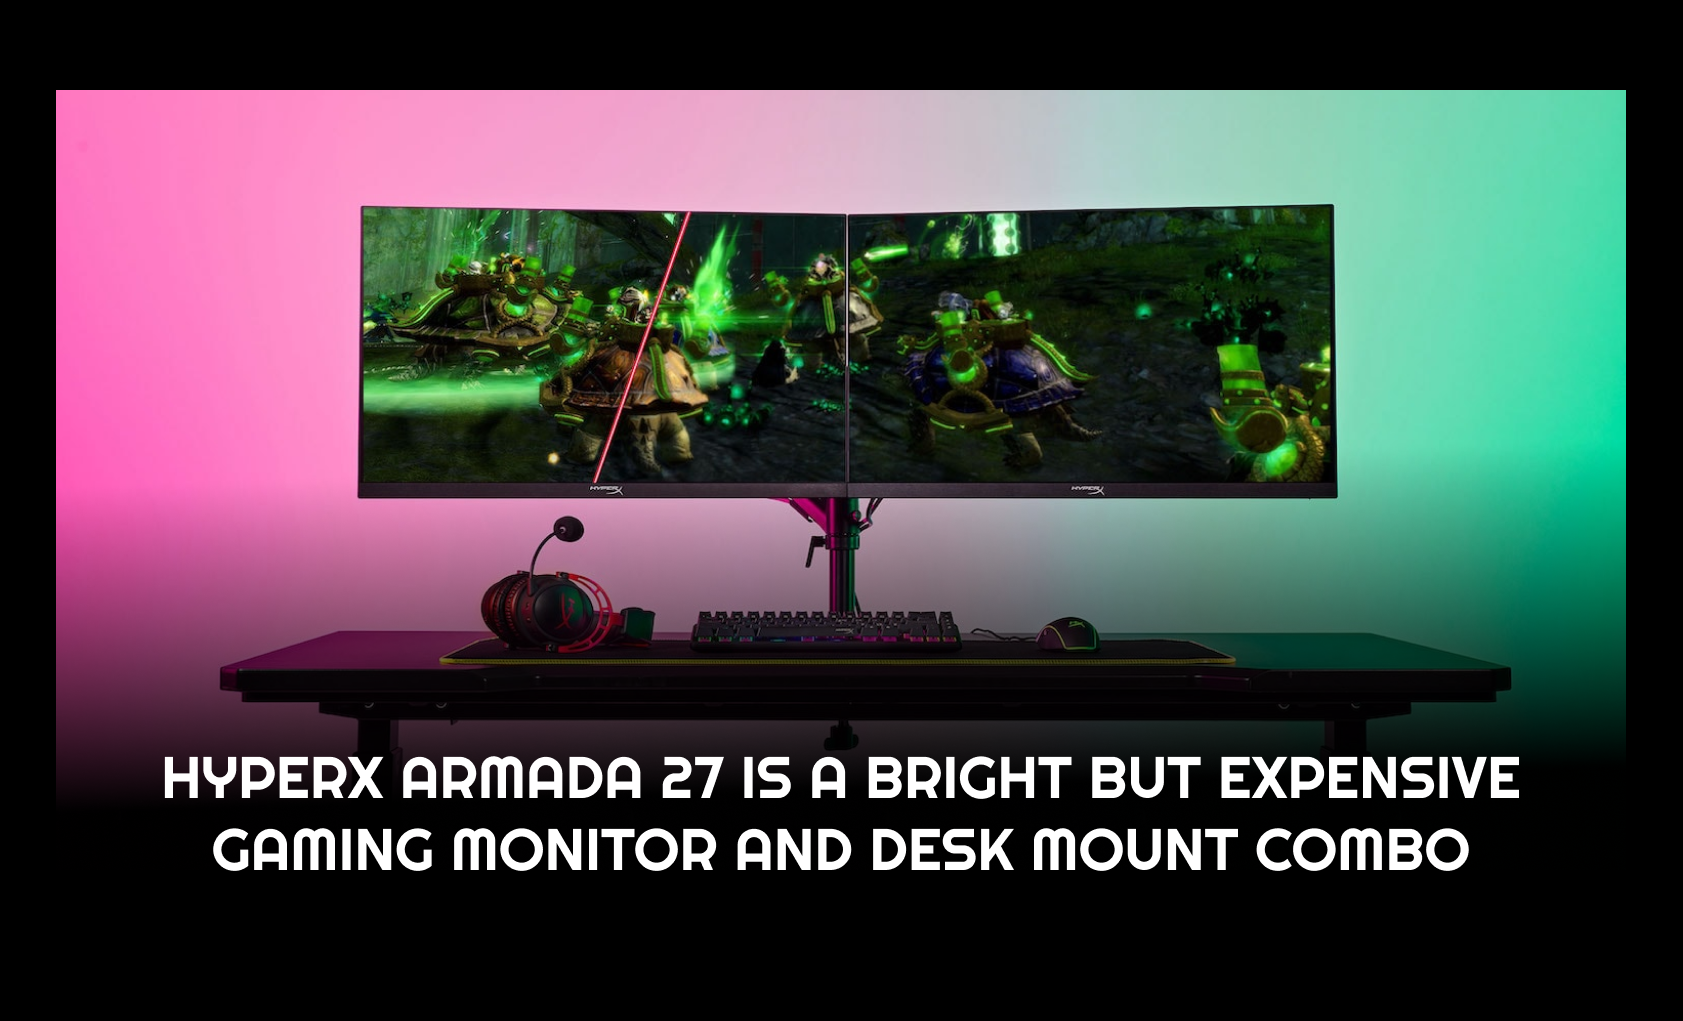 HyperX Armada 27 is a bright but expensive gaming monitor